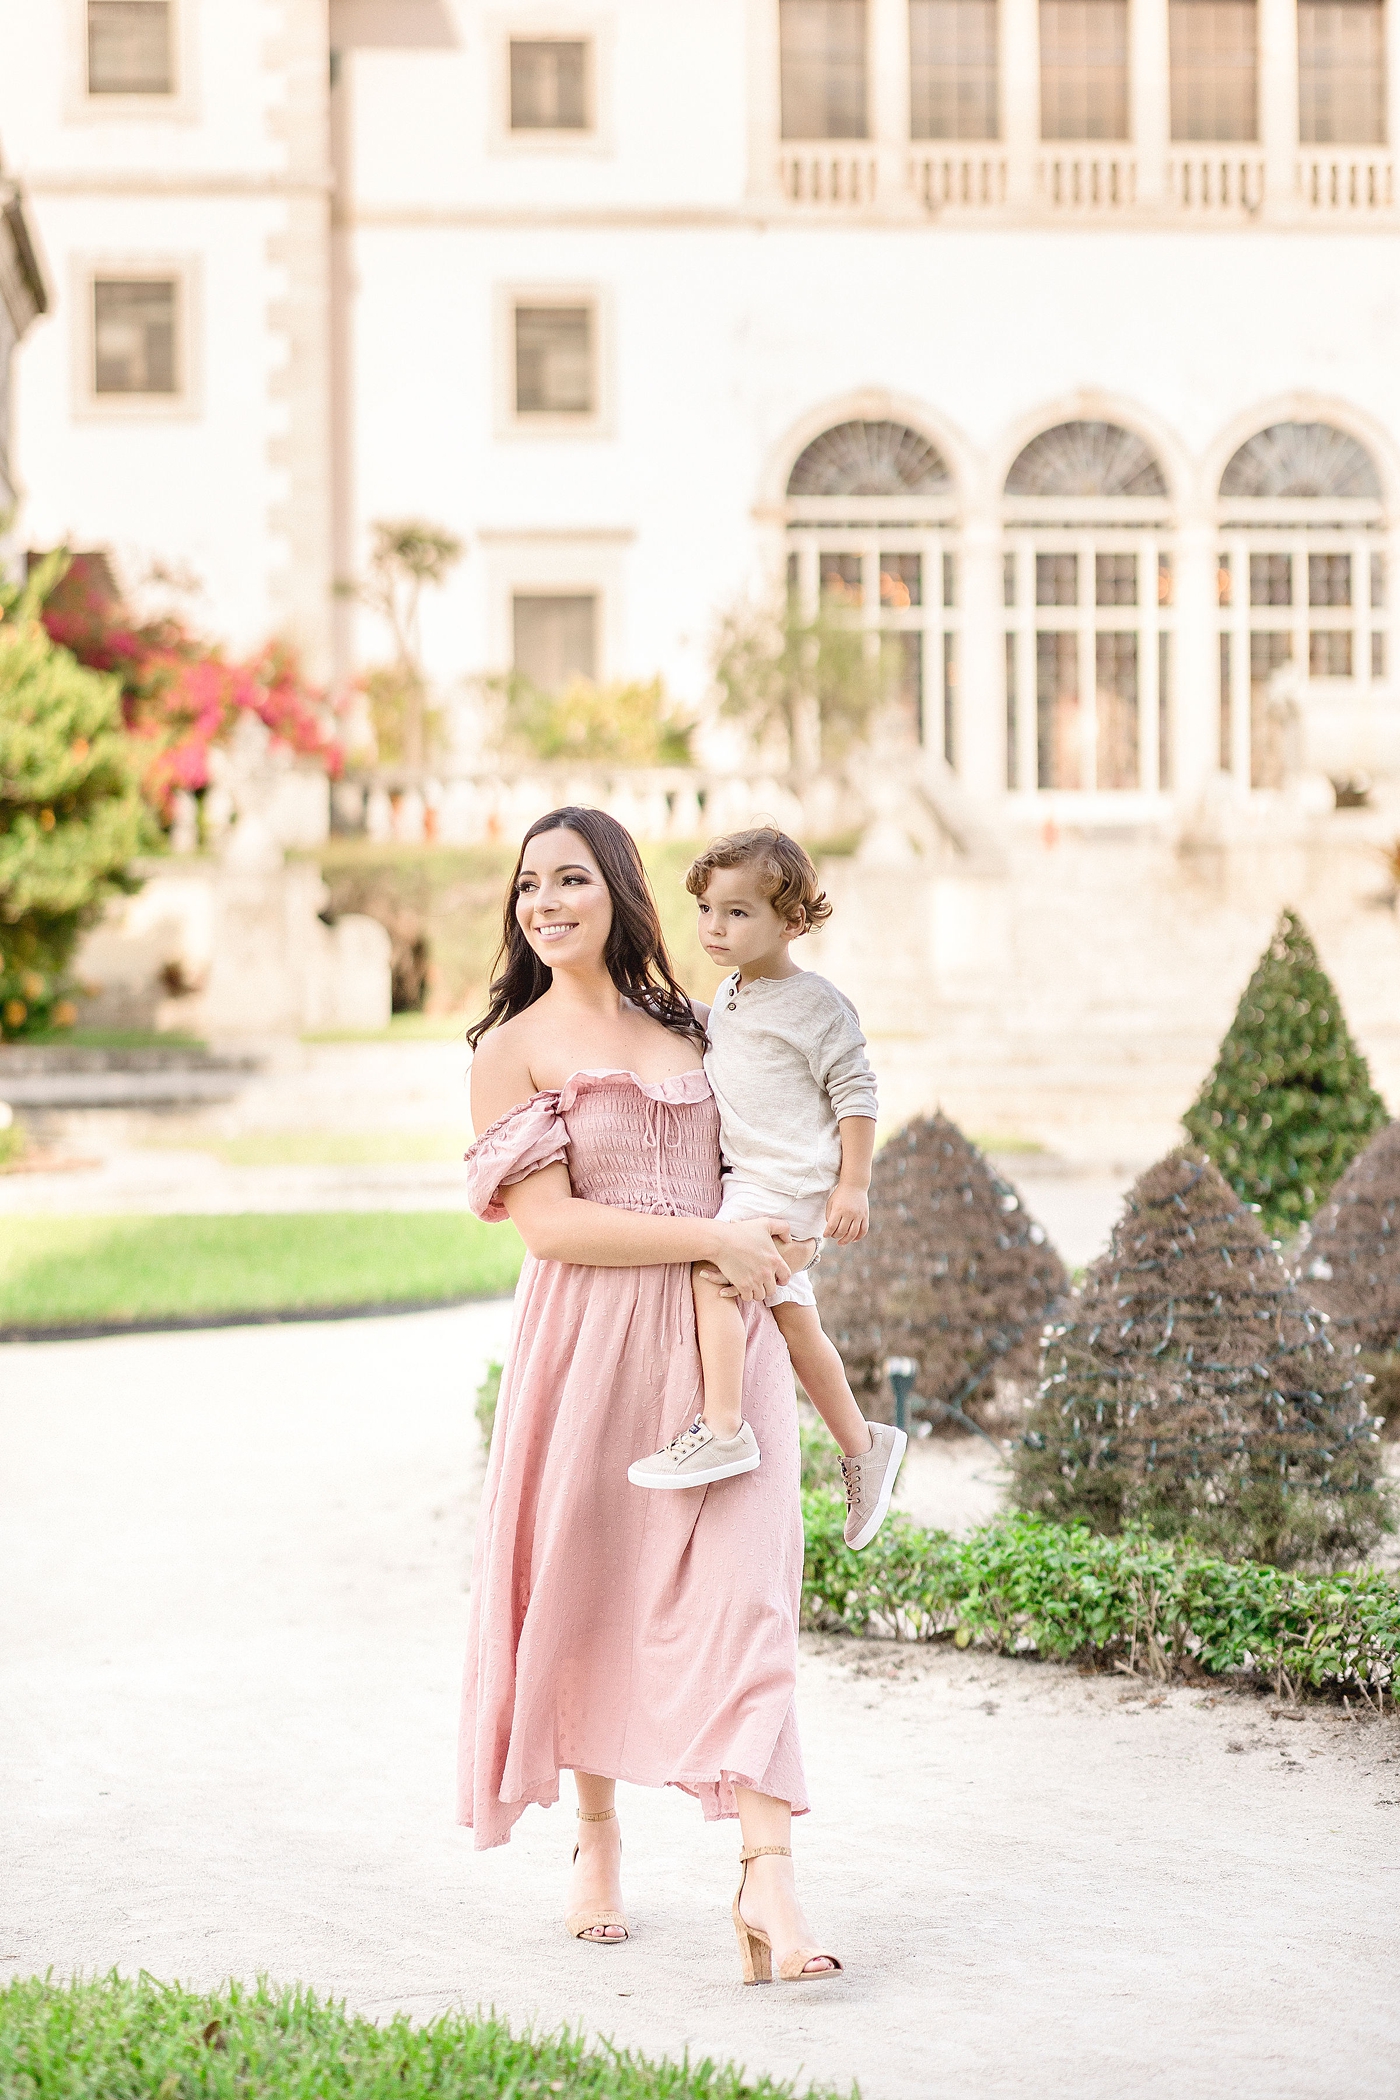 Mom holds son while walking along path in Vizcaya Gardens. Photo by Ivanna Vidal Photography.